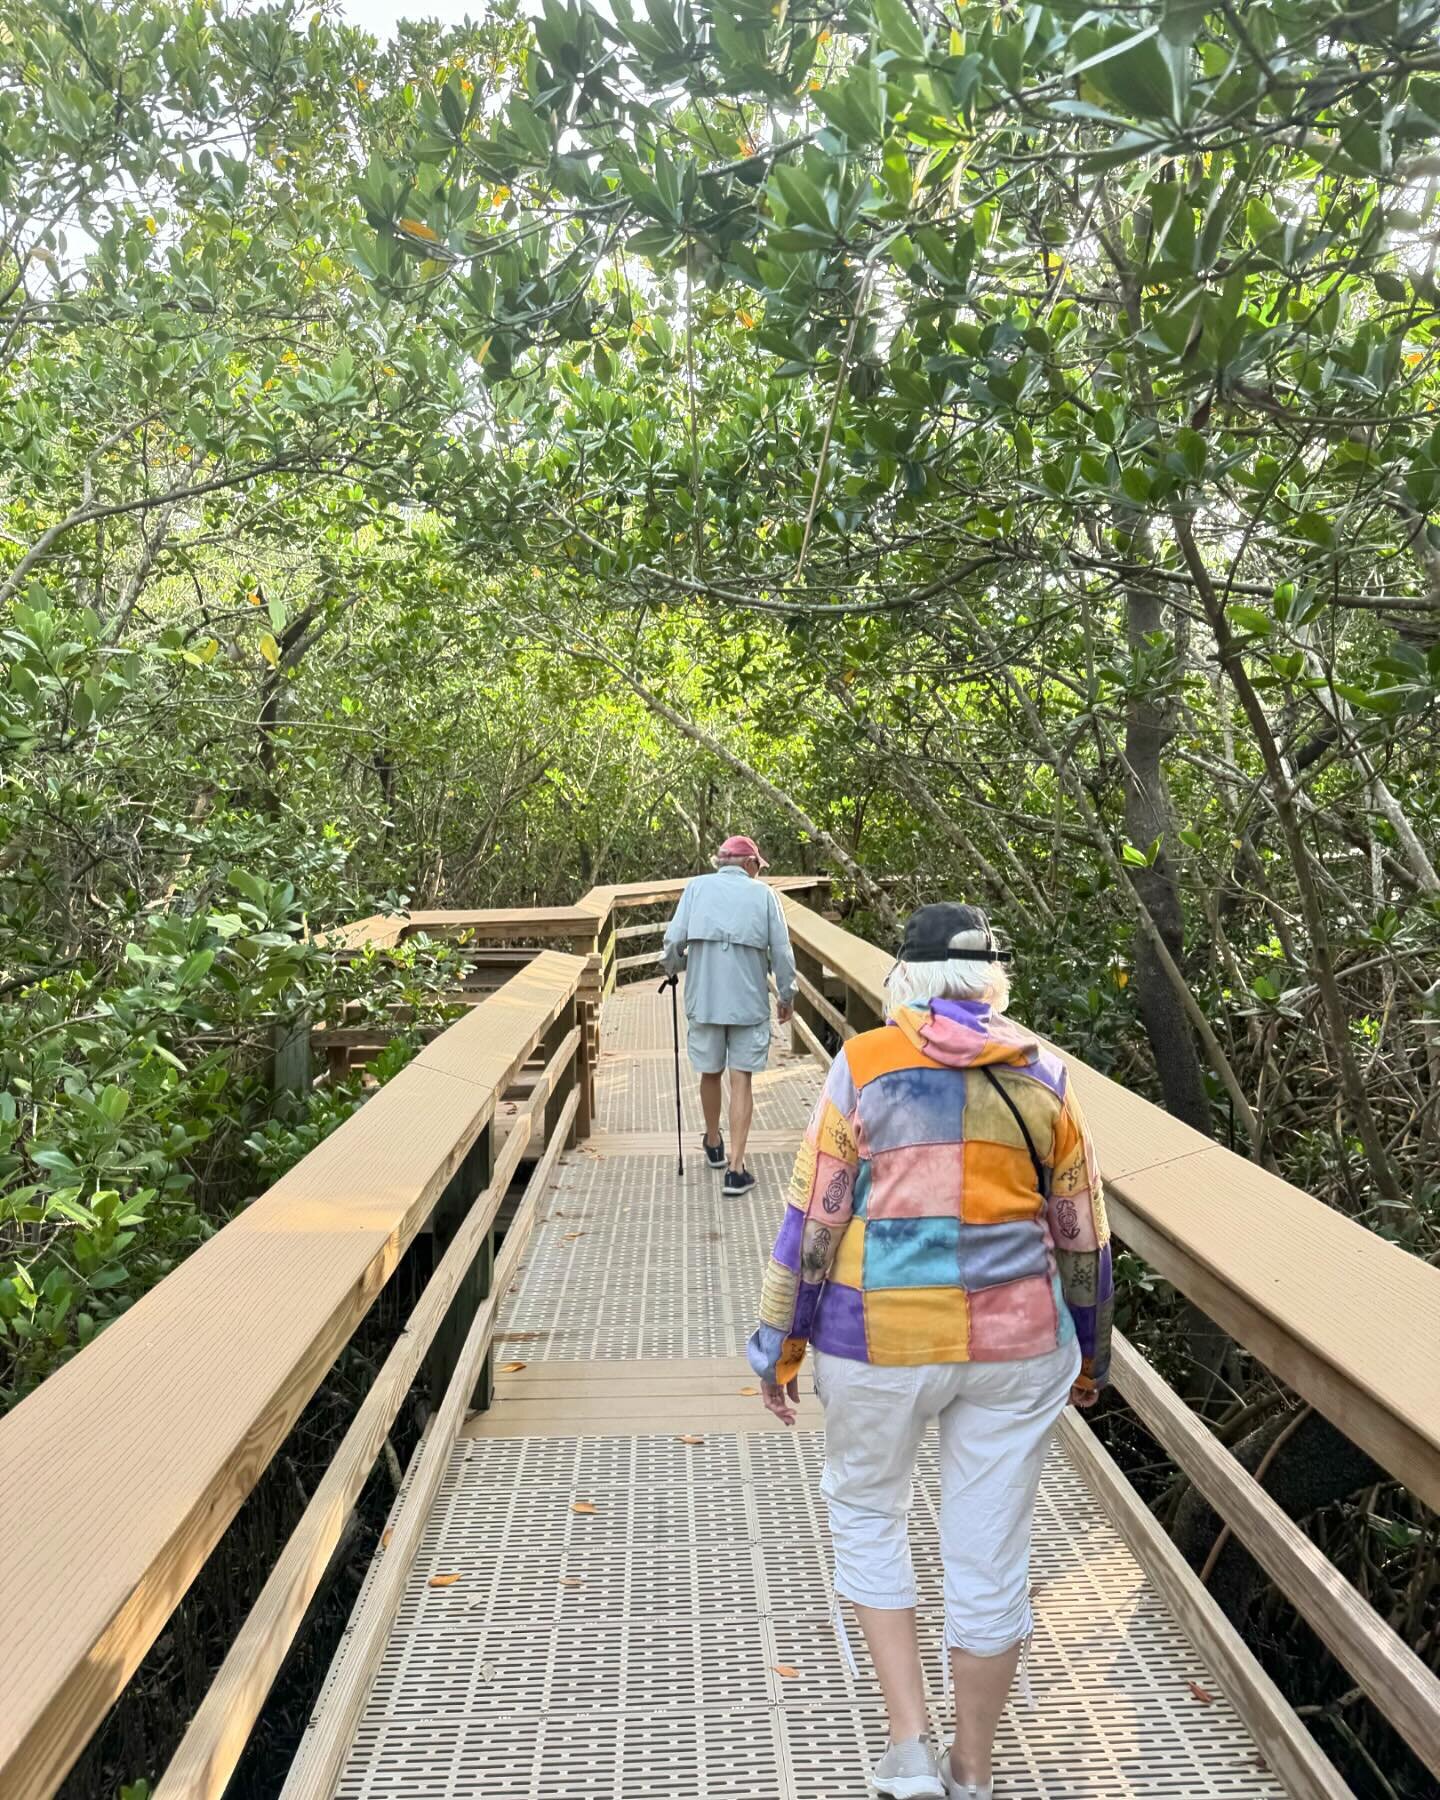 Got to walk an extra day through the mangroves with these folks due to the NYC rains and JetBlue shenanigans.